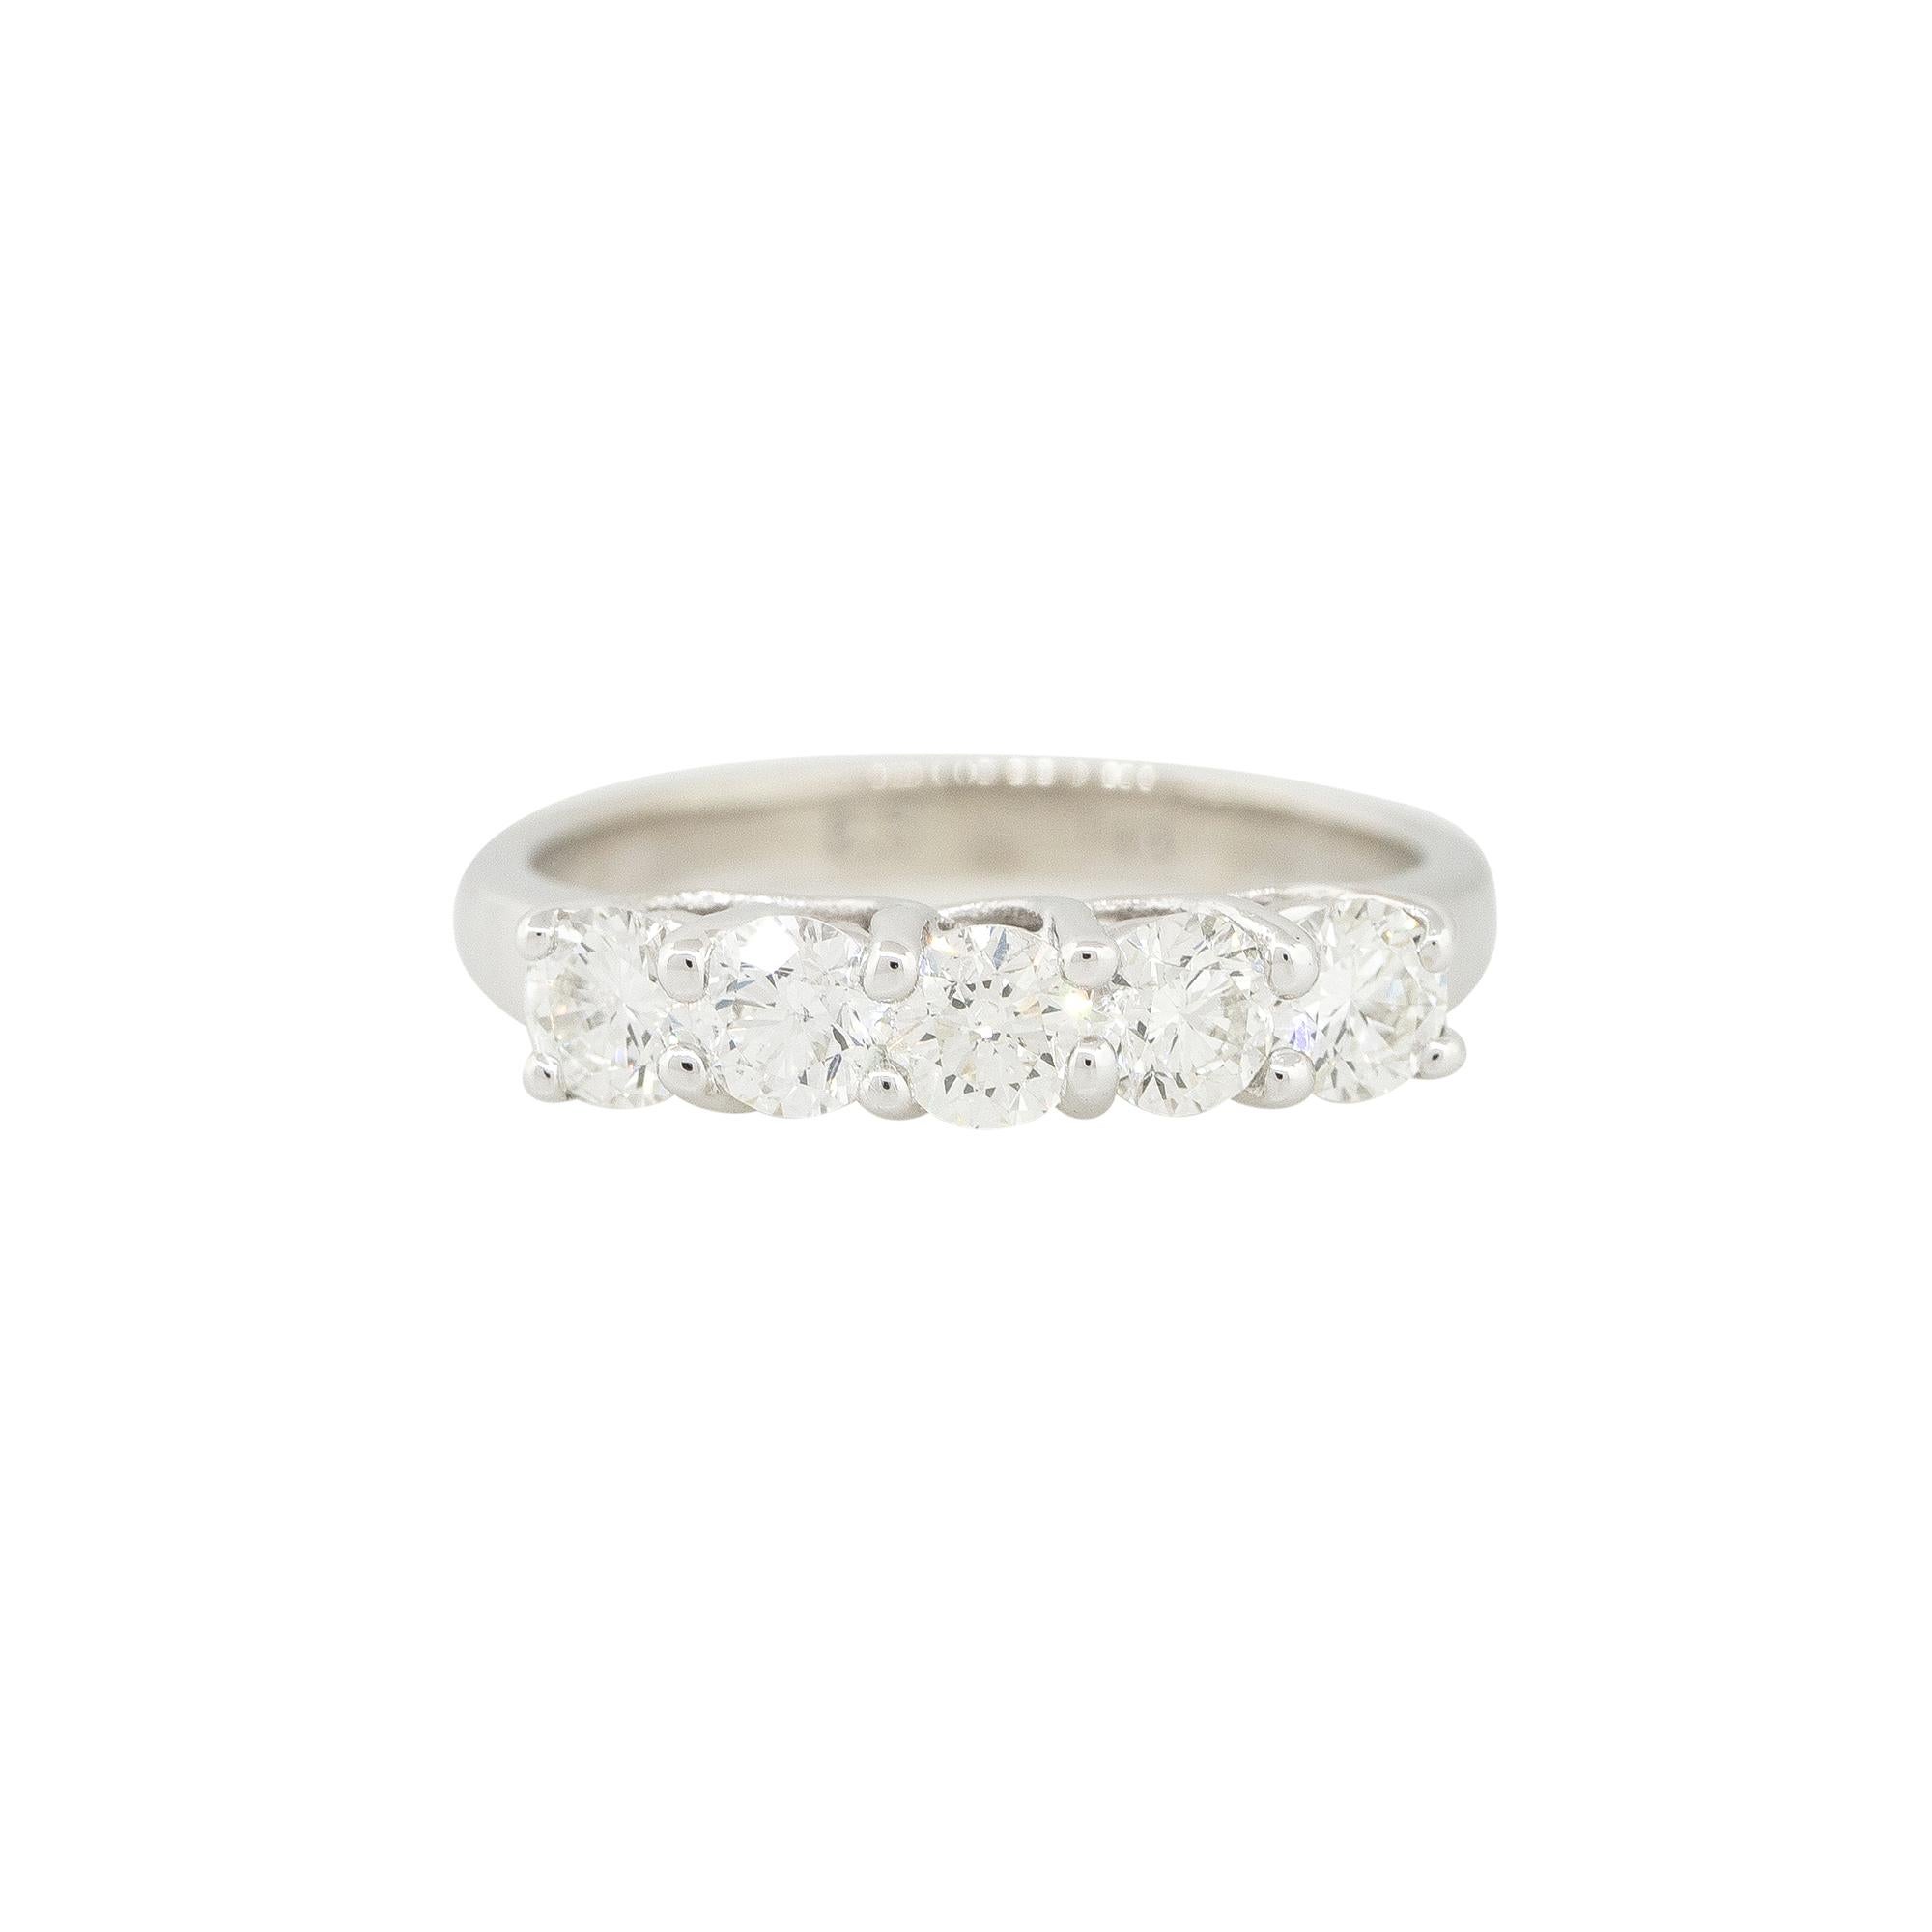 14k White Gold 1.10ctw Round Brilliant 5 Diamond Band
Material: 14k White Gold
Diamond Details: There are 5 Round Brilliant cut diamonds, weighing approximately 1.10 carats total. All diamonds are approximately H/I in color and approximately SI in